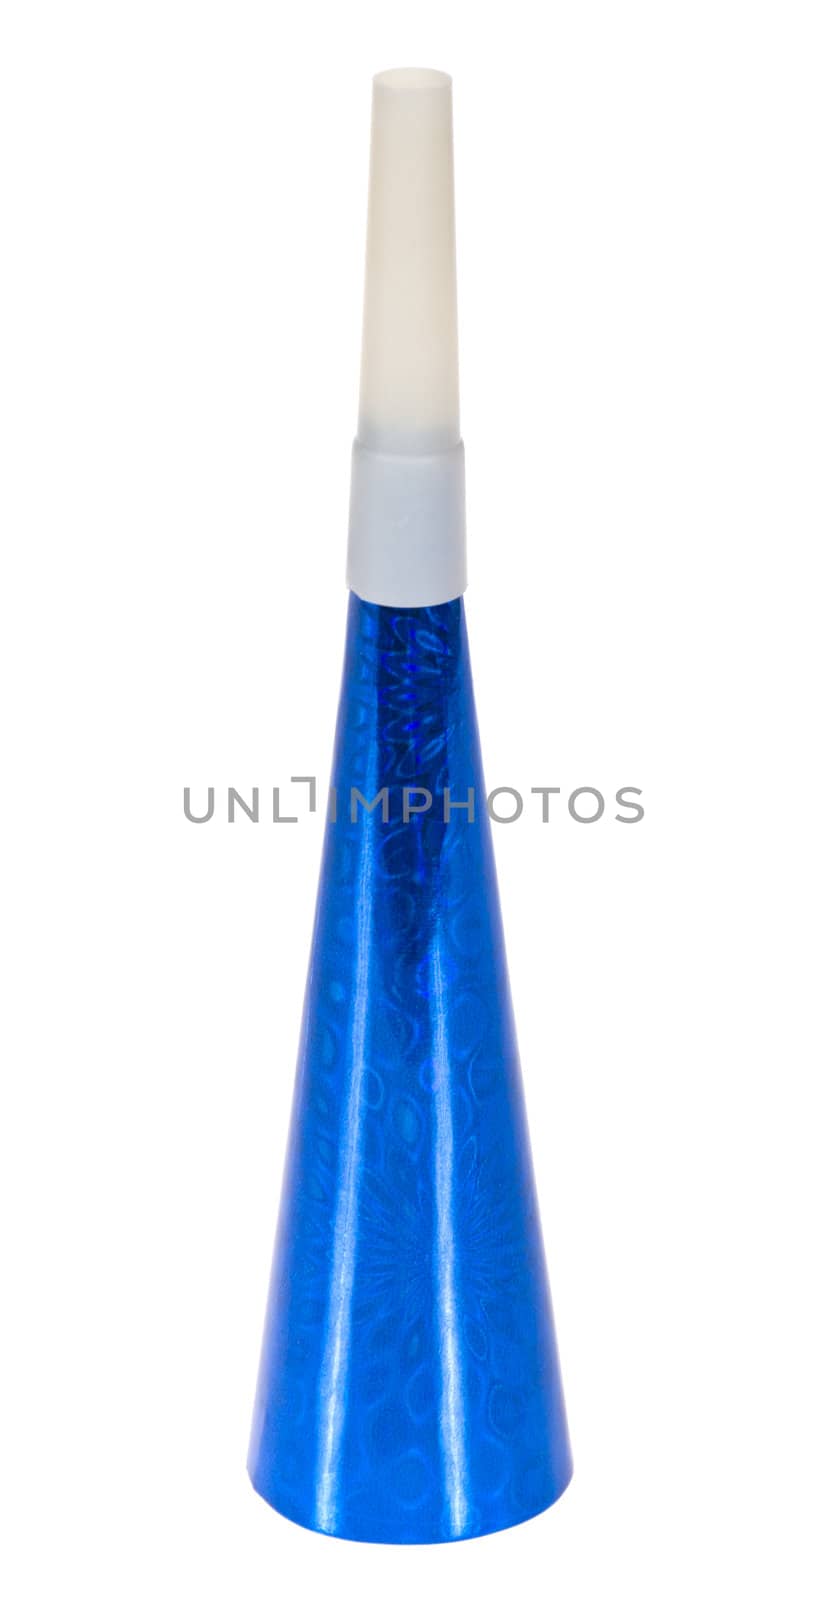 Party Blower, photo on the white background